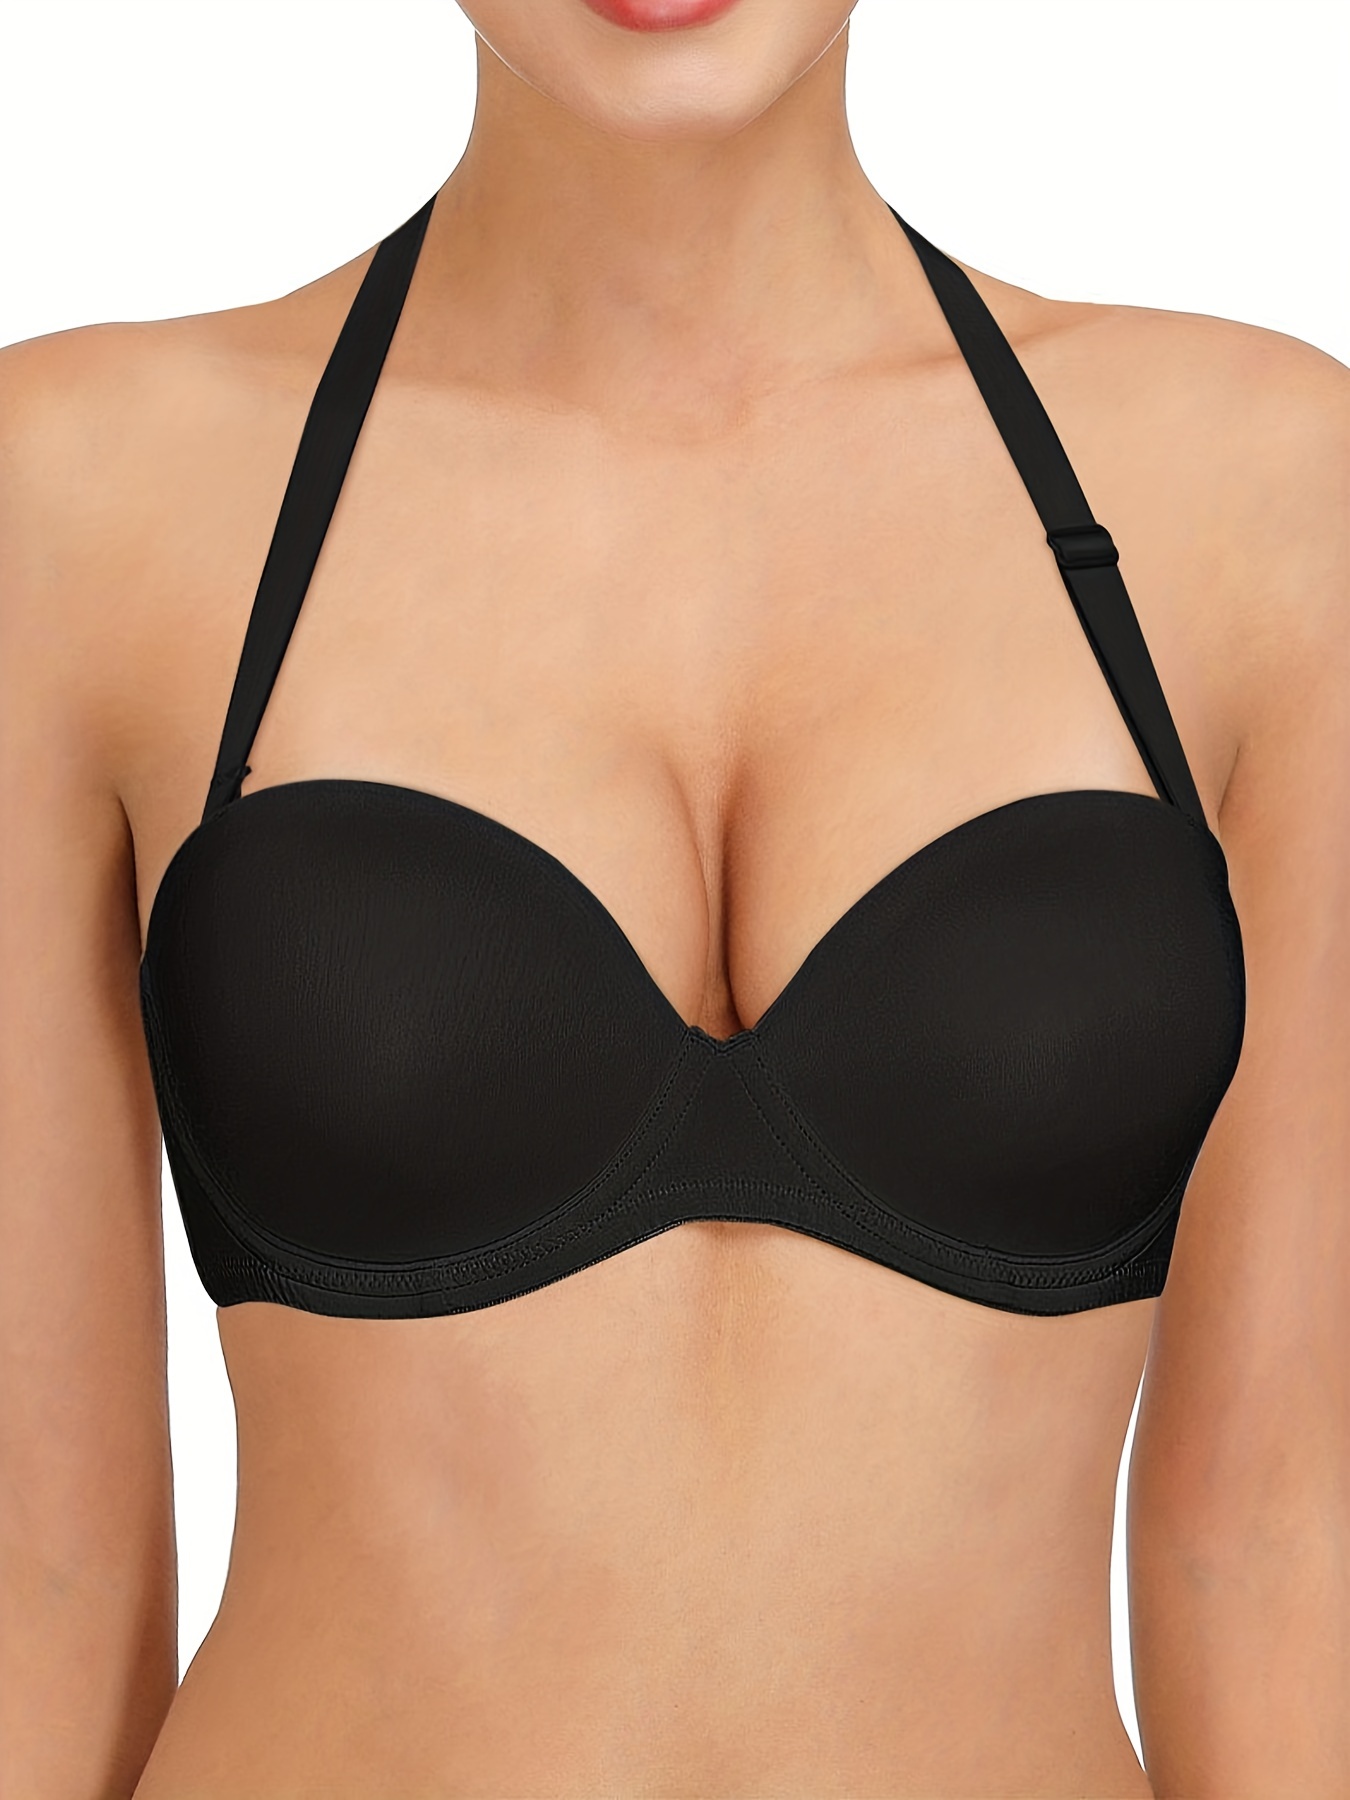 Women's Plus Size Push Up Bra with Convertible Straps